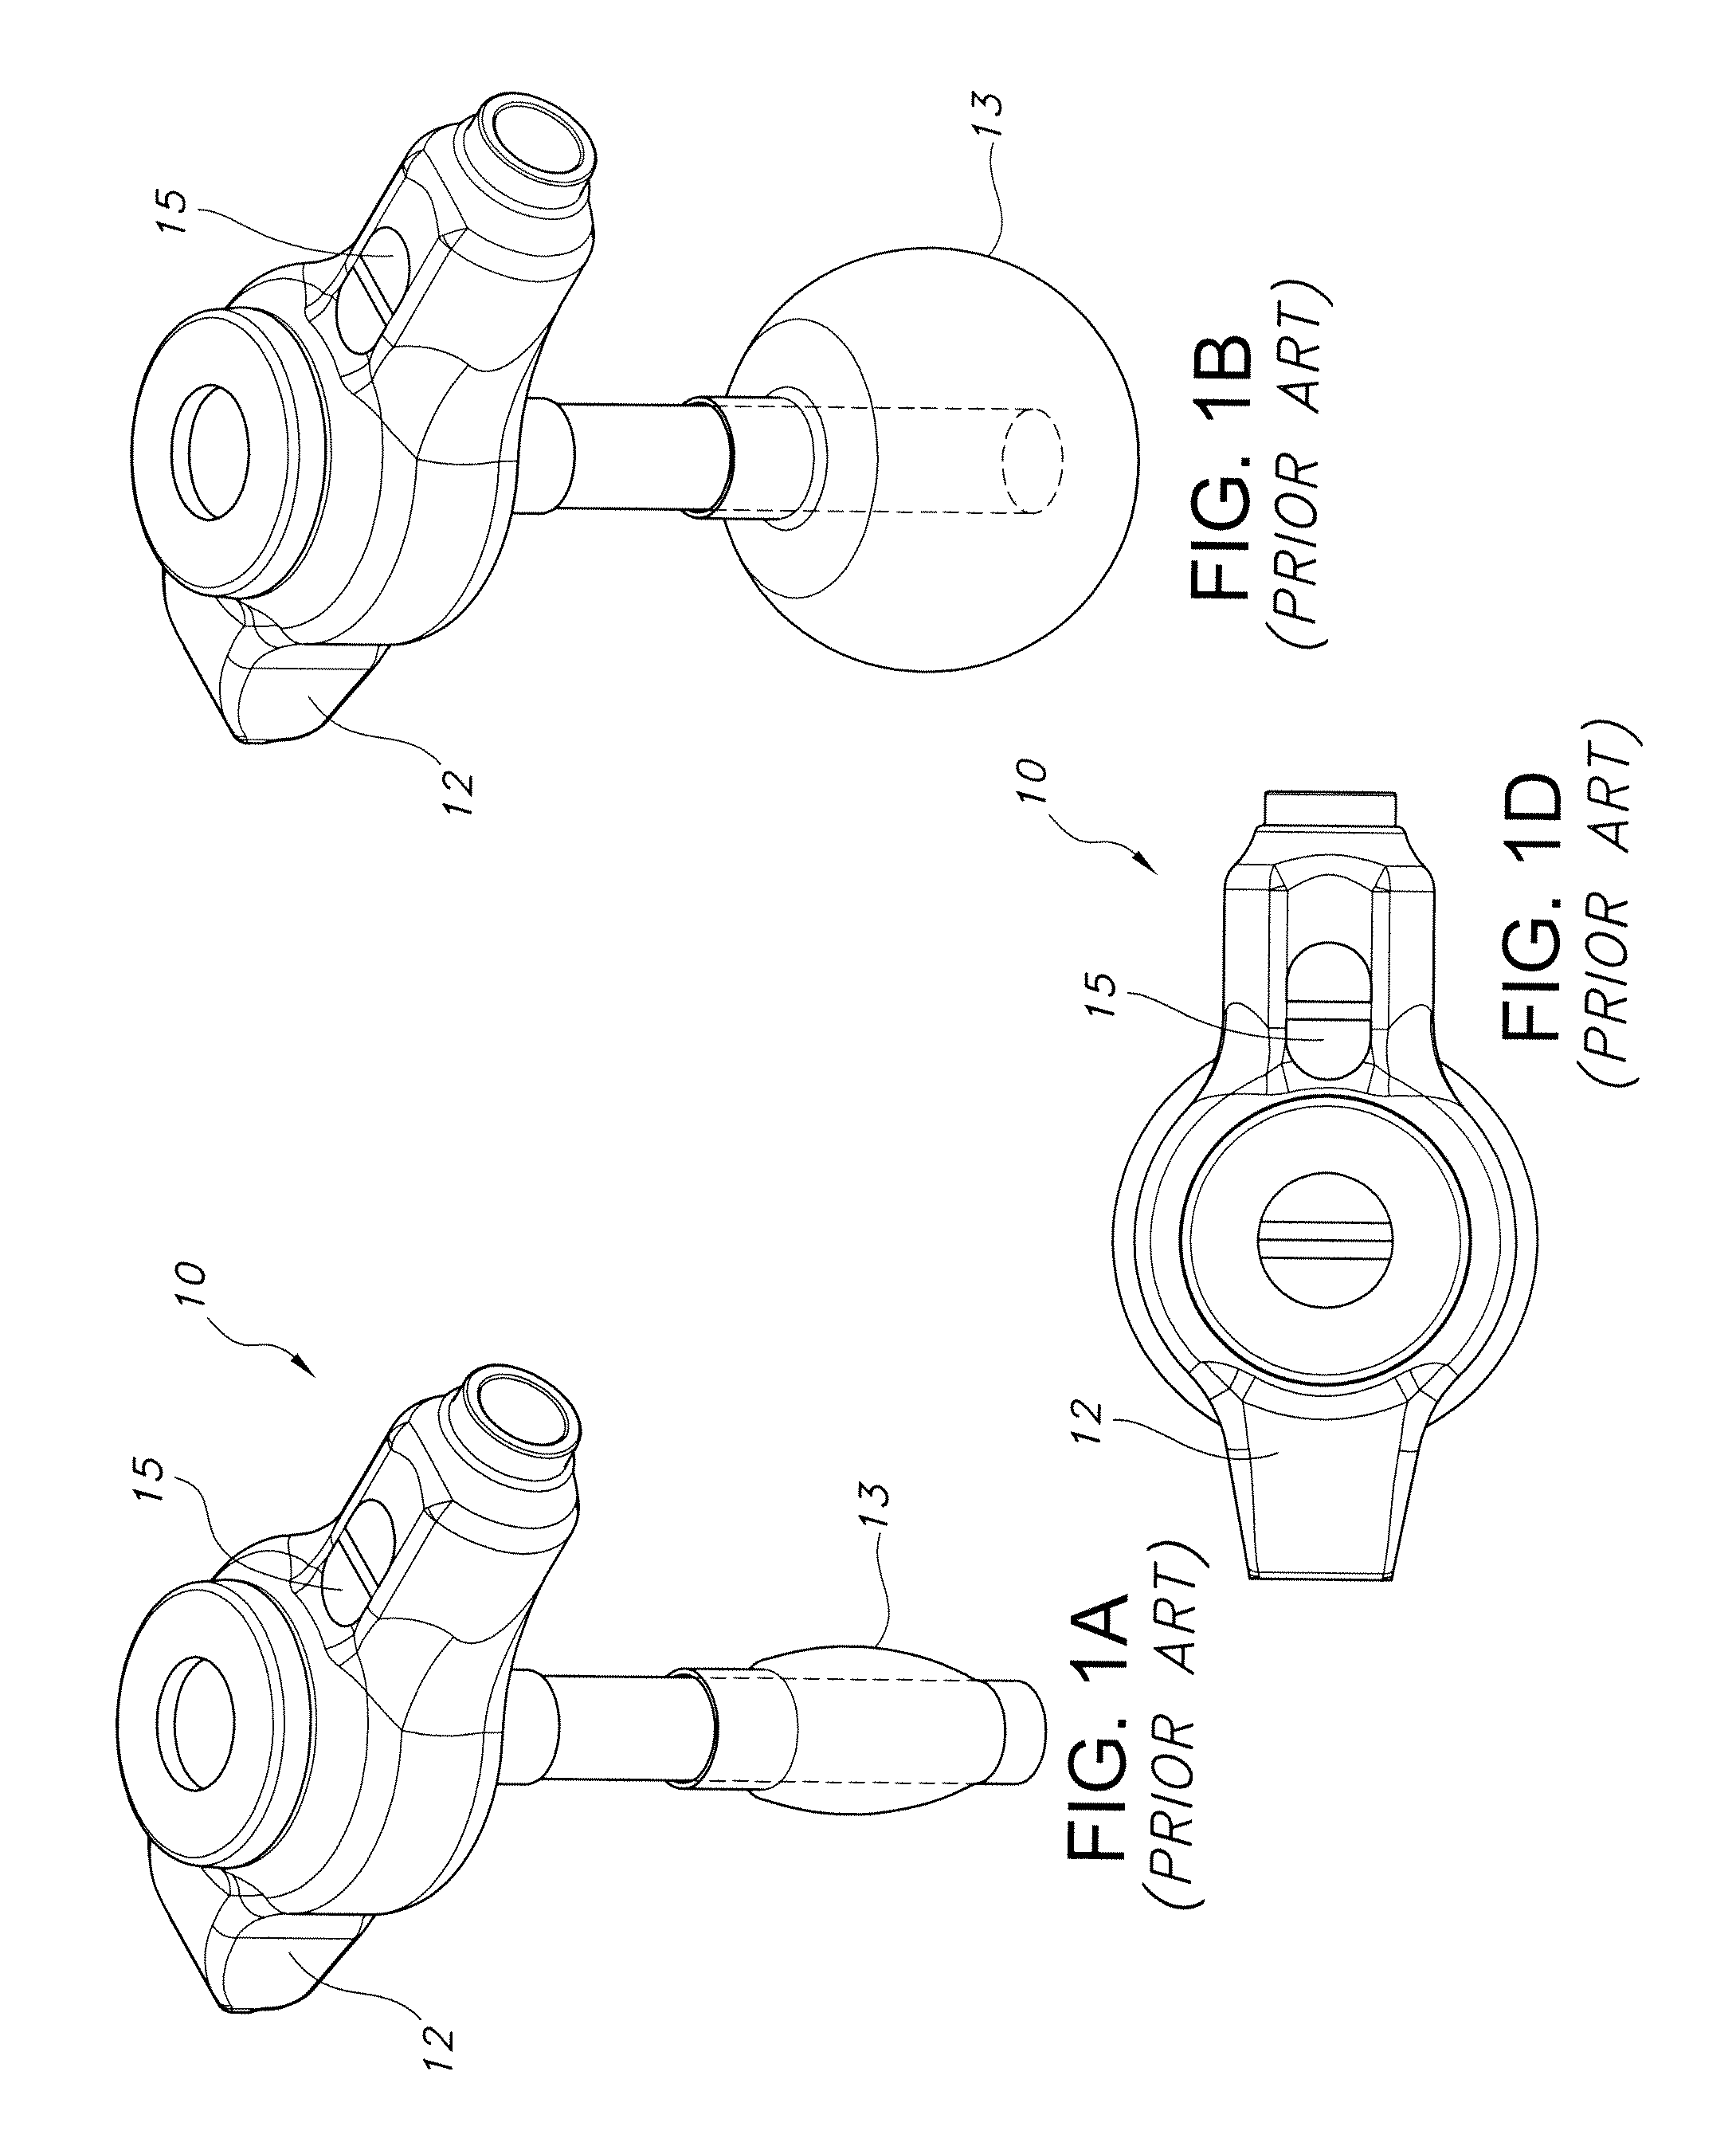 Enteral feeding catheter assembly incorporating an indicator